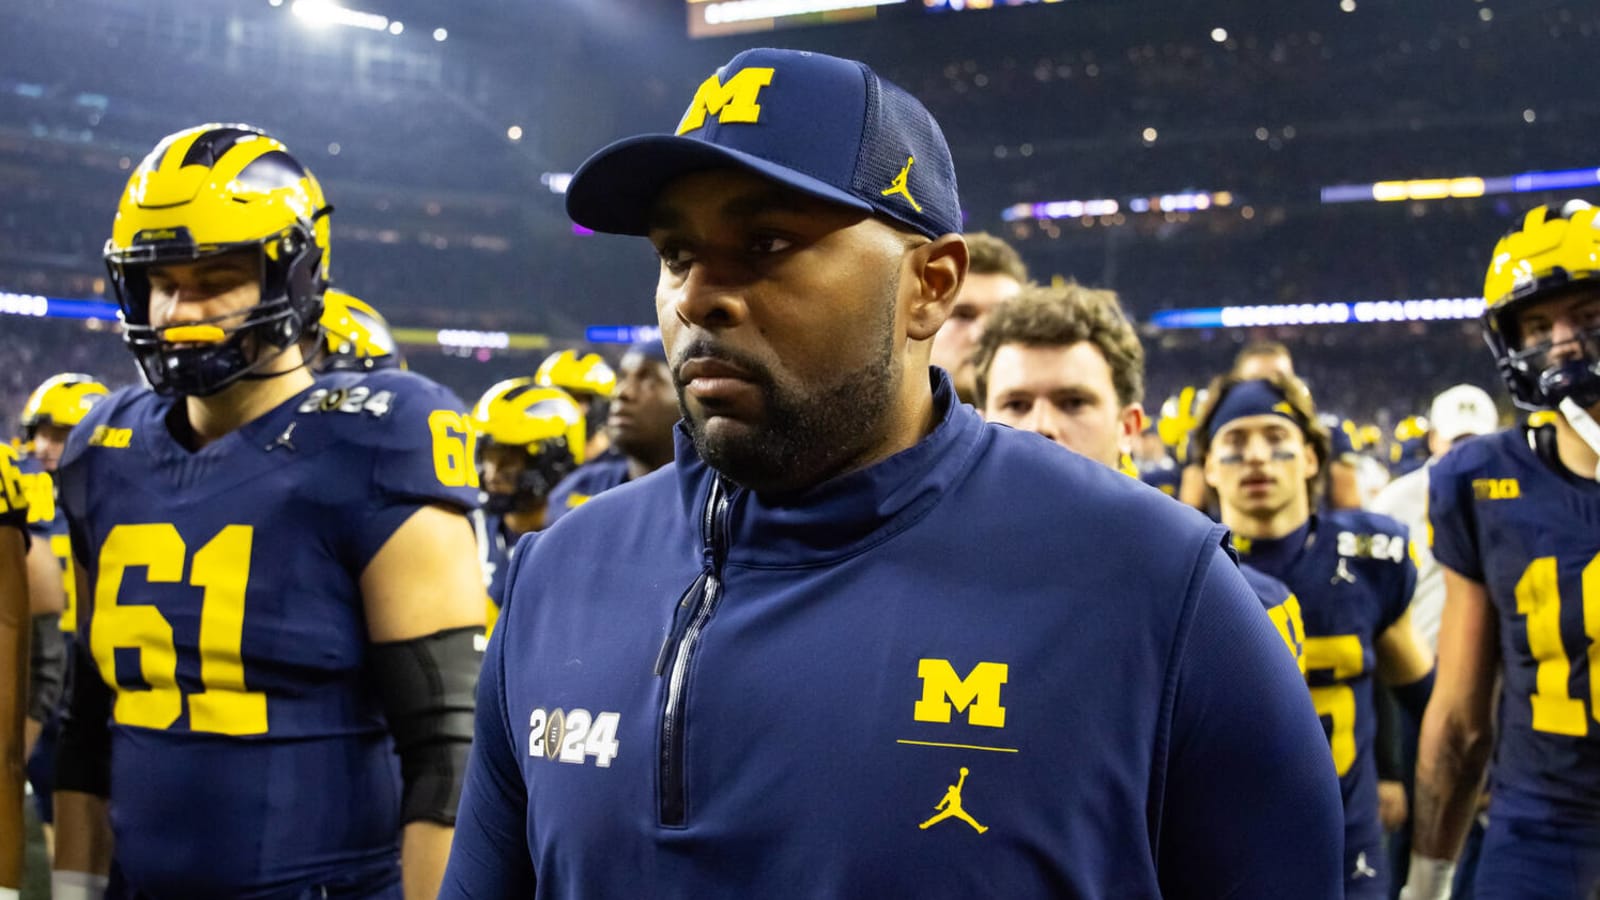 Report: Michigan has replacement in mind for Jim Harbaugh